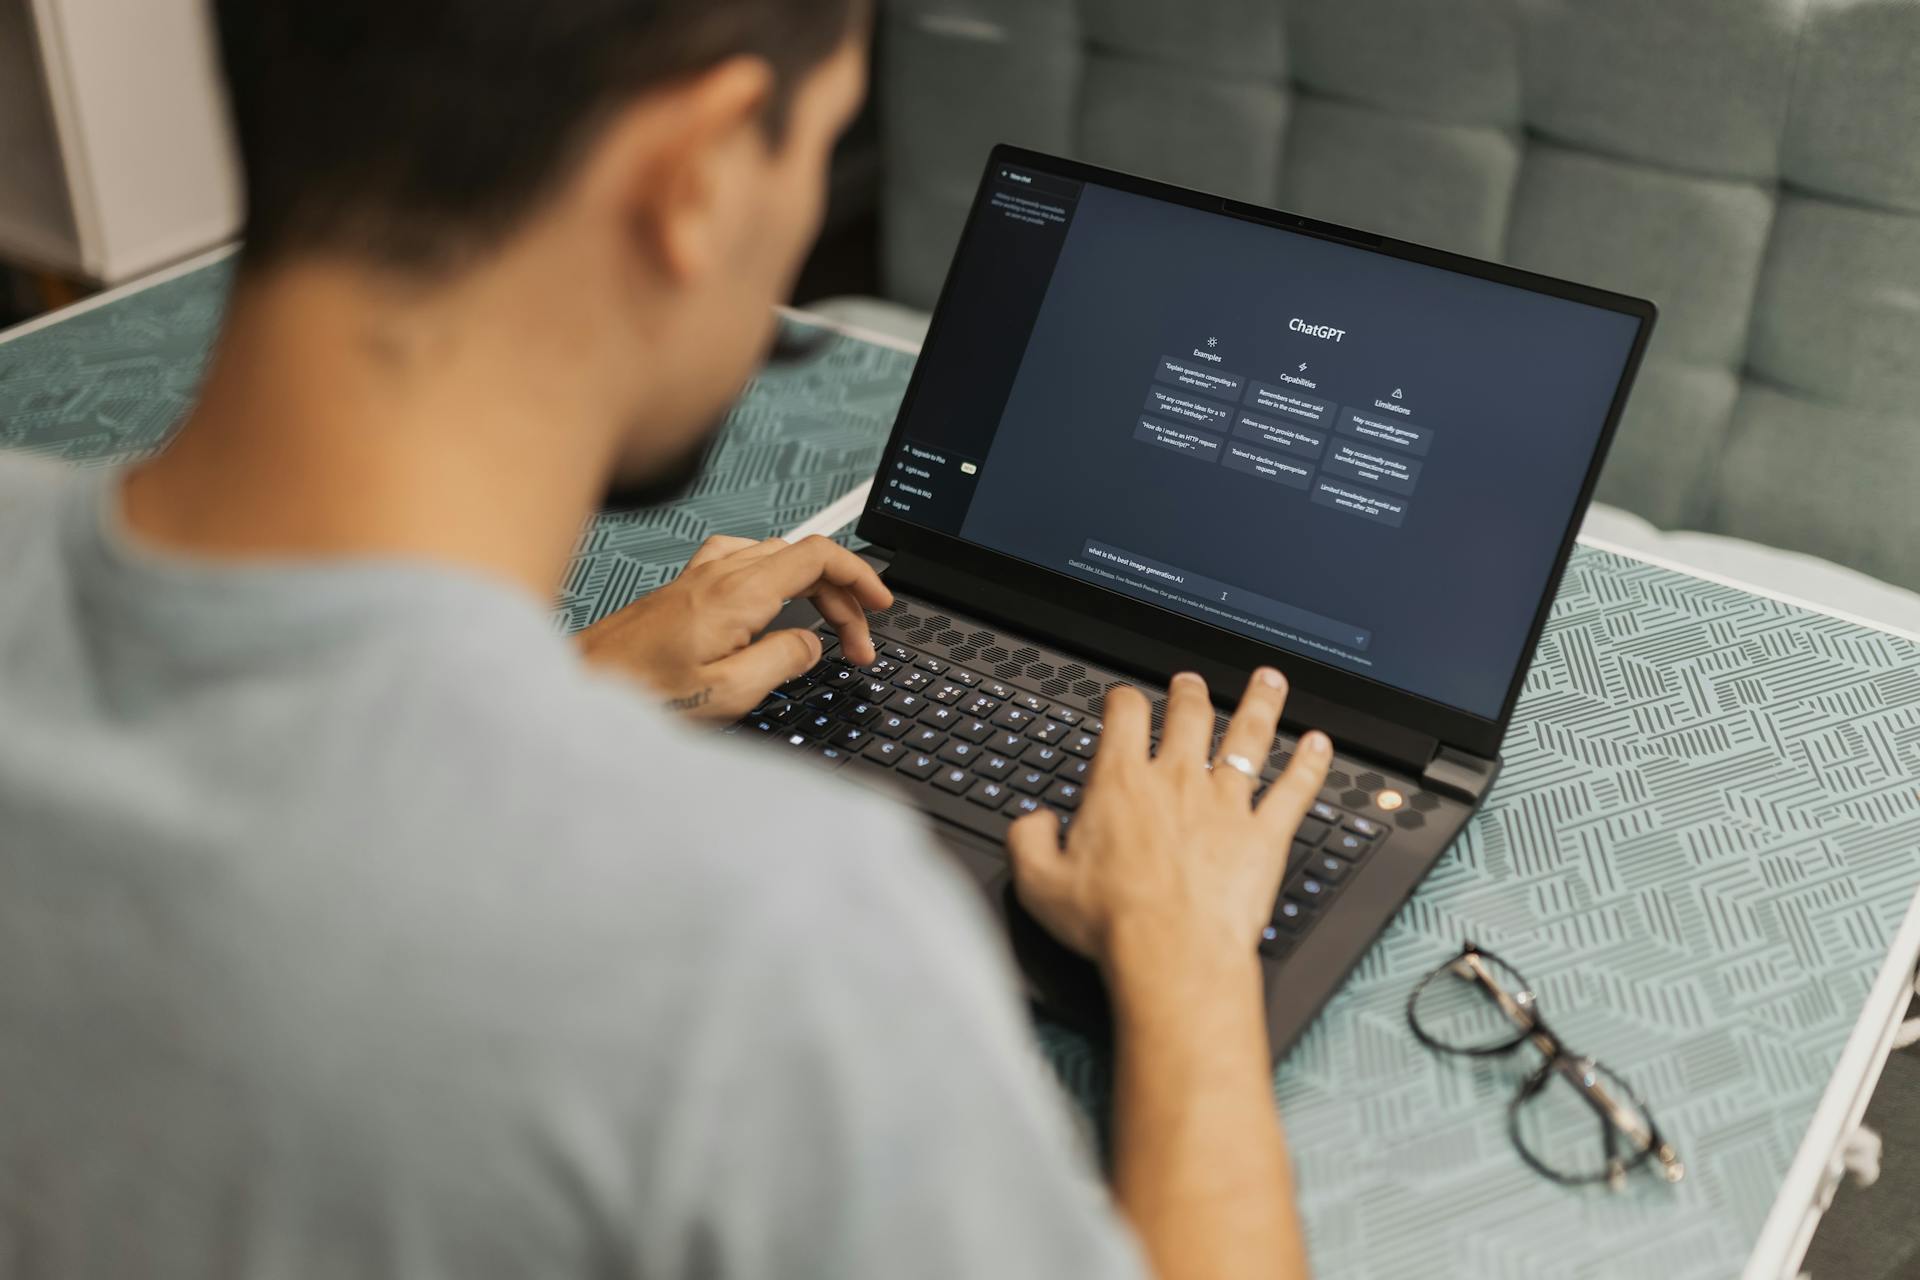 A man typing on a laptop computer with the ChatGPT online webpage on the laptop screen